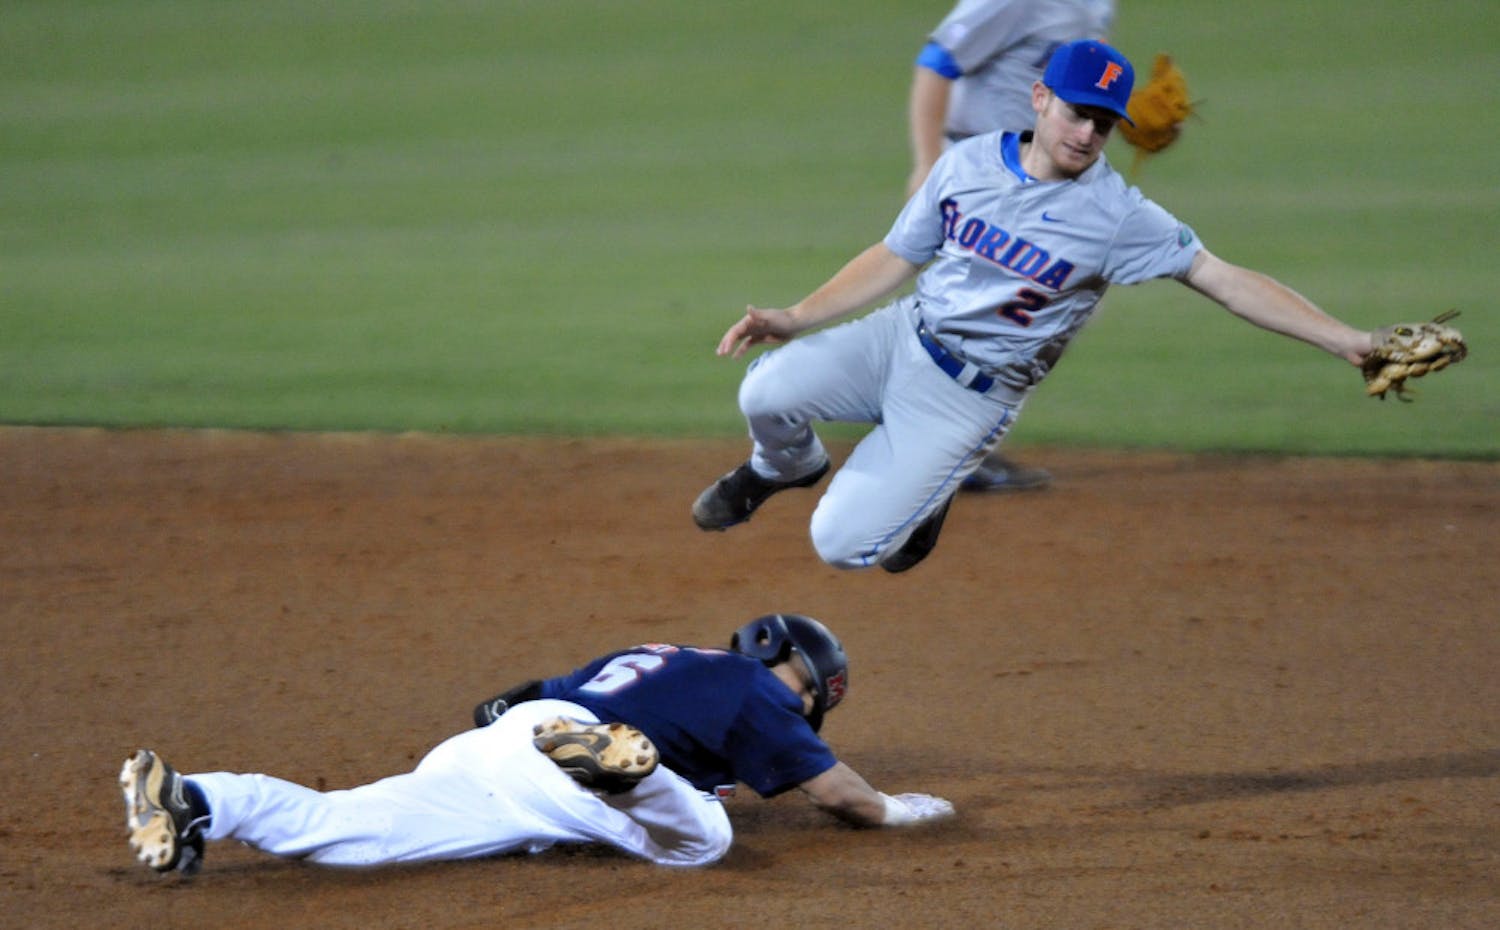 Mississippi's Blake Newalu (6) steals second as the ball gets past Florida's Caey Turgeon (2) during a college baseball game in Oxford, Miss. on Friday, March 30, 2012. (AP Photo/Oxford Eagle, Bruce Newman)